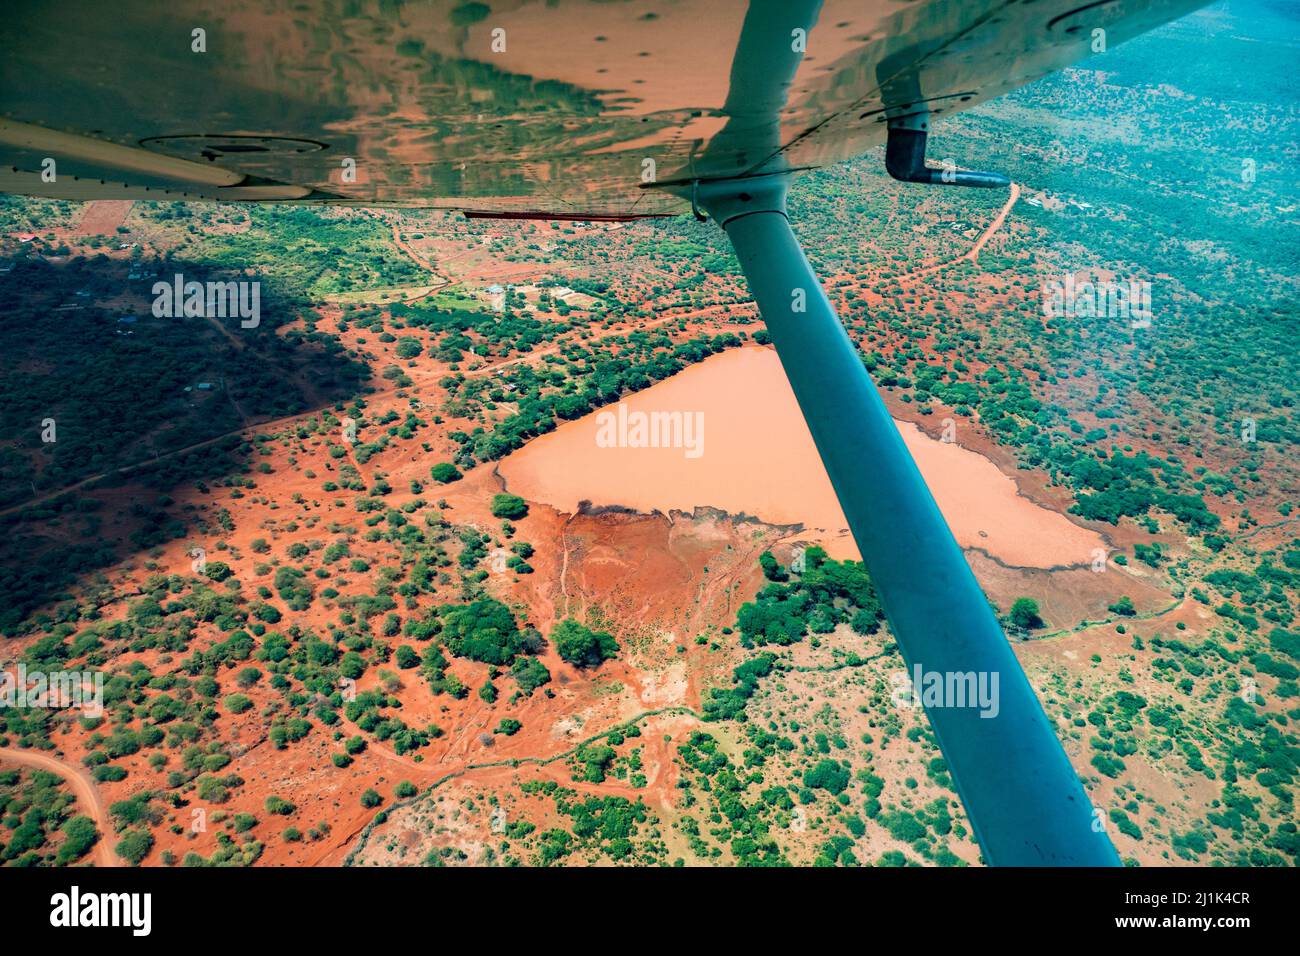 Beautiful view of the picturesque landscape of the Great Rift Valley from the window of a small sports plane flying over the Kenyan savannah Stock Photo